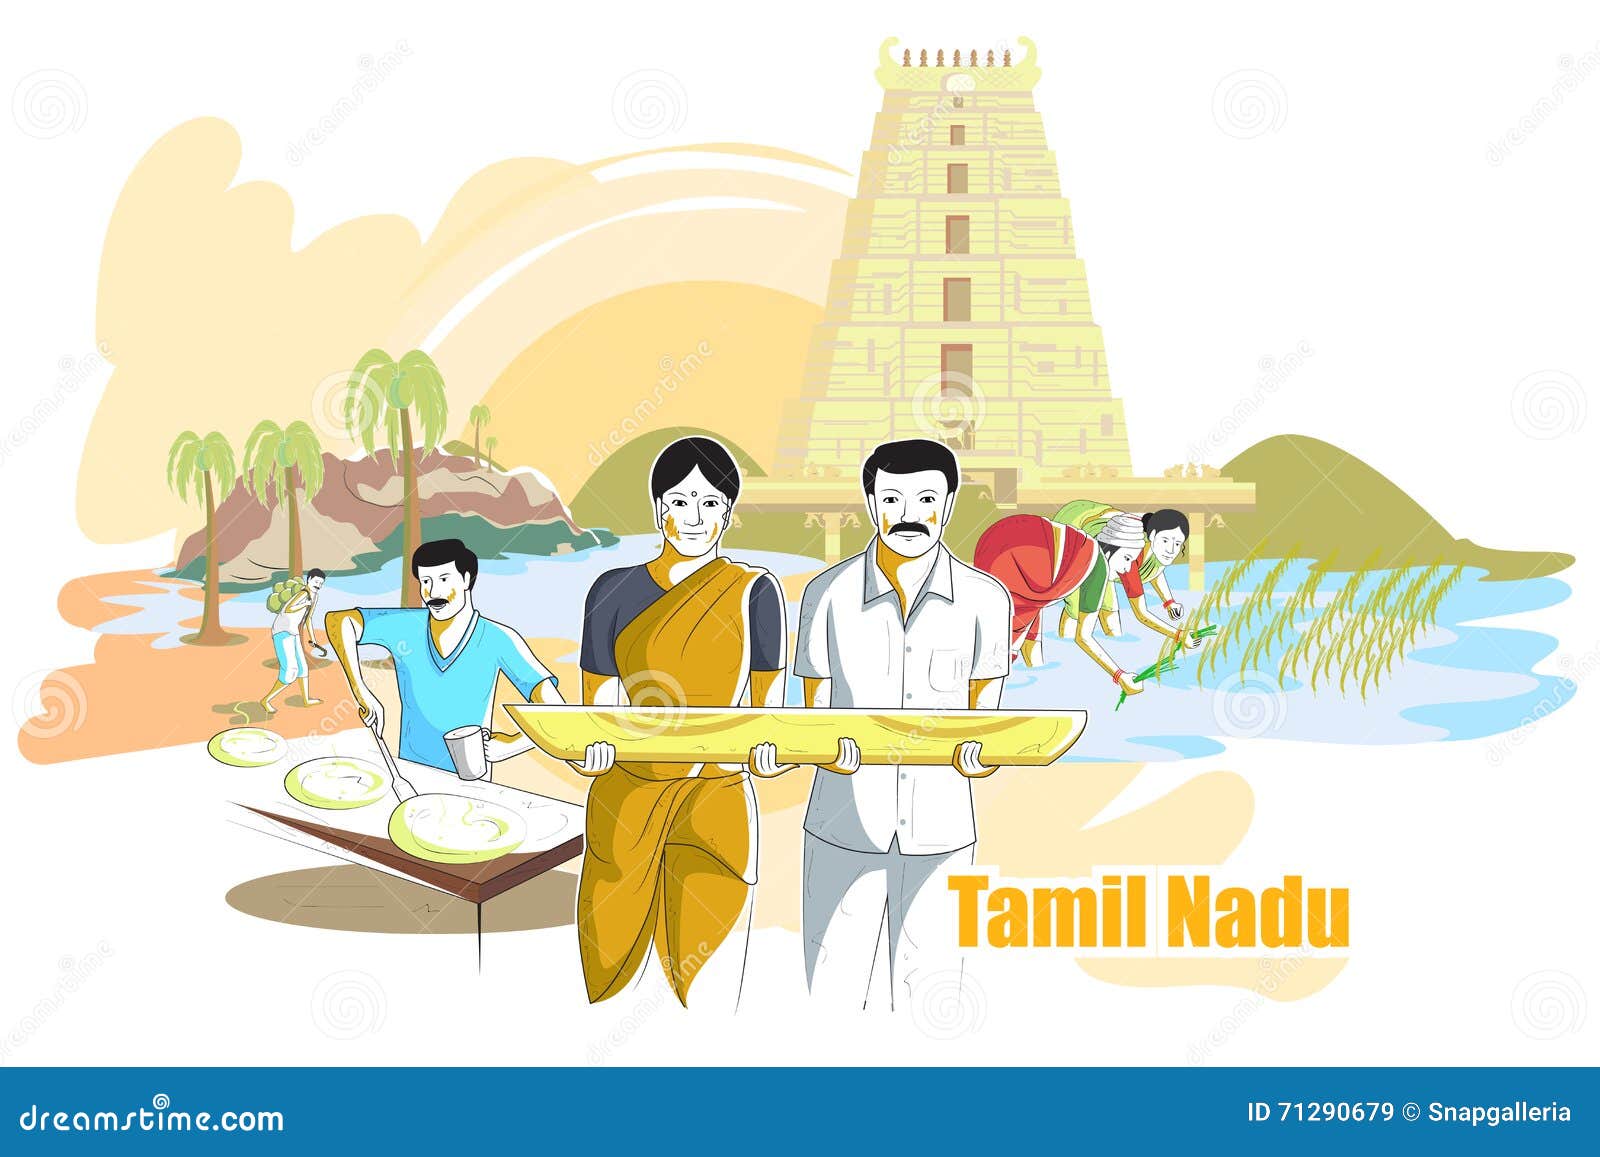 people and culture of tamil nadu, india